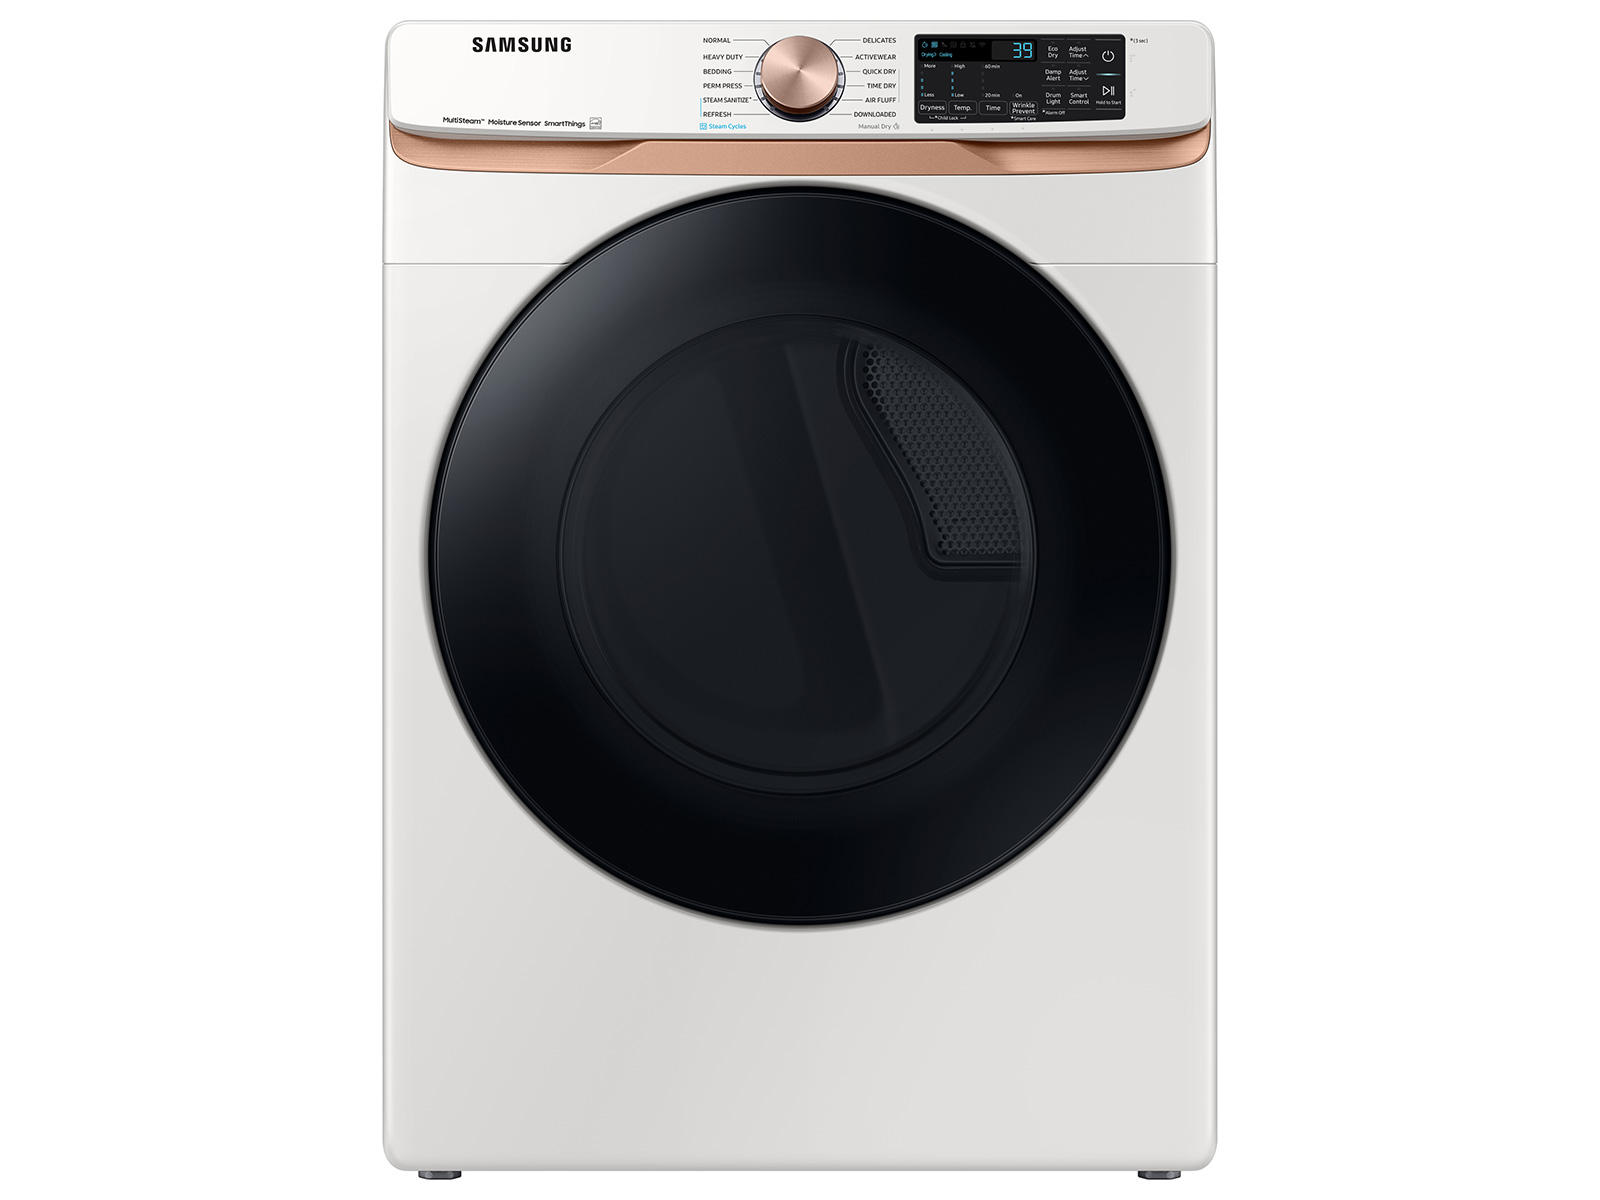 Photos - Tumble Dryer Samsung 7.5 cu. ft. Smart Electric Dryer with Steam Sanitize+ and Sensor D 